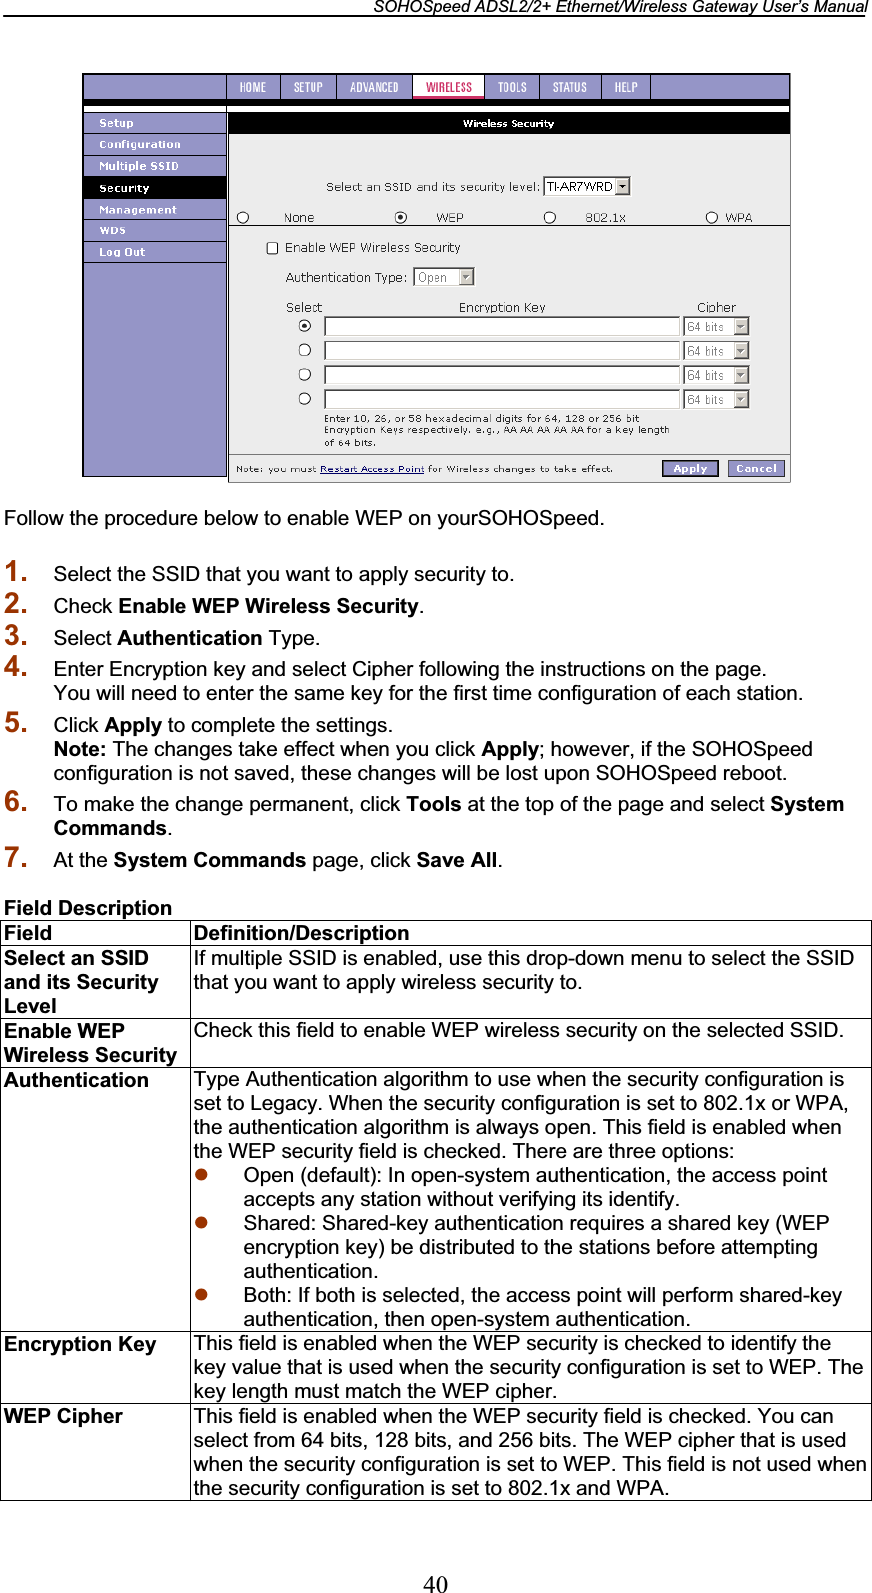 SOHOSpeed ADSL2/2+ Ethernet/Wireless Gateway User’s Manual 40Follow the procedure below to enable WEP on yourSOHOSpeed. 1. Select the SSID that you want to apply security to. 2. Check Enable WEP Wireless Security.3. Select Authentication Type. 4. Enter Encryption key and select Cipher following the instructions on the page. You will need to enter the same key for the first time configuration of each station. 5. Click Apply to complete the settings. Note: The changes take effect when you click Apply; however, if the SOHOSpeed configuration is not saved, these changes will be lost upon SOHOSpeed reboot. 6. To make the change permanent, click Tools at the top of the page and select System Commands.7. At the System Commands page, click Save All.Field Description Field Definition/Description Select an SSID and its Security Level If multiple SSID is enabled, use this drop-down menu to select the SSID that you want to apply wireless security to. Enable WEP Wireless Security Check this field to enable WEP wireless security on the selected SSID. Authentication  Type Authentication algorithm to use when the security configuration is set to Legacy. When the security configuration is set to 802.1x or WPA, the authentication algorithm is always open. This field is enabled when the WEP security field is checked. There are three options: z Open (default): In open-system authentication, the access point accepts any station without verifying its identify. z Shared: Shared-key authentication requires a shared key (WEP encryption key) be distributed to the stations before attempting authentication. z Both: If both is selected, the access point will perform shared-key authentication, then open-system authentication. Encryption Key  This field is enabled when the WEP security is checked to identify the key value that is used when the security configuration is set to WEP. The key length must match the WEP cipher. WEP Cipher  This field is enabled when the WEP security field is checked. You can select from 64 bits, 128 bits, and 256 bits. The WEP cipher that is used when the security configuration is set to WEP. This field is not used whenthe security configuration is set to 802.1x and WPA. 